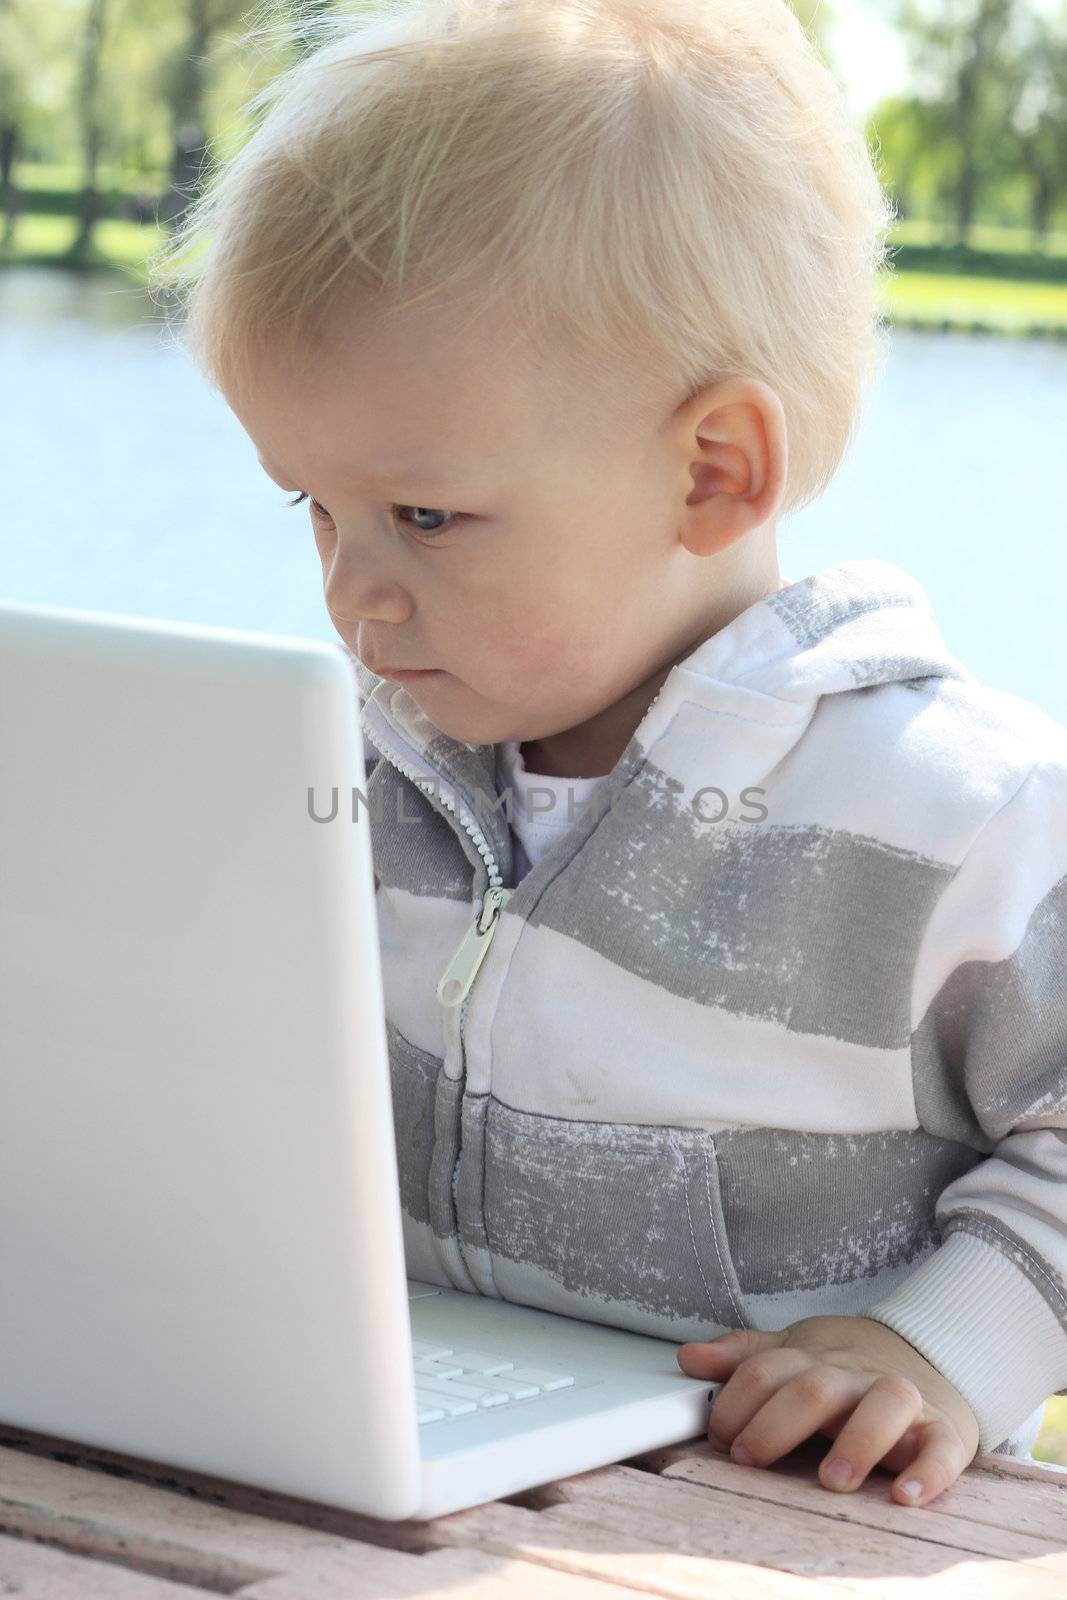 small child working with laptop outdoor